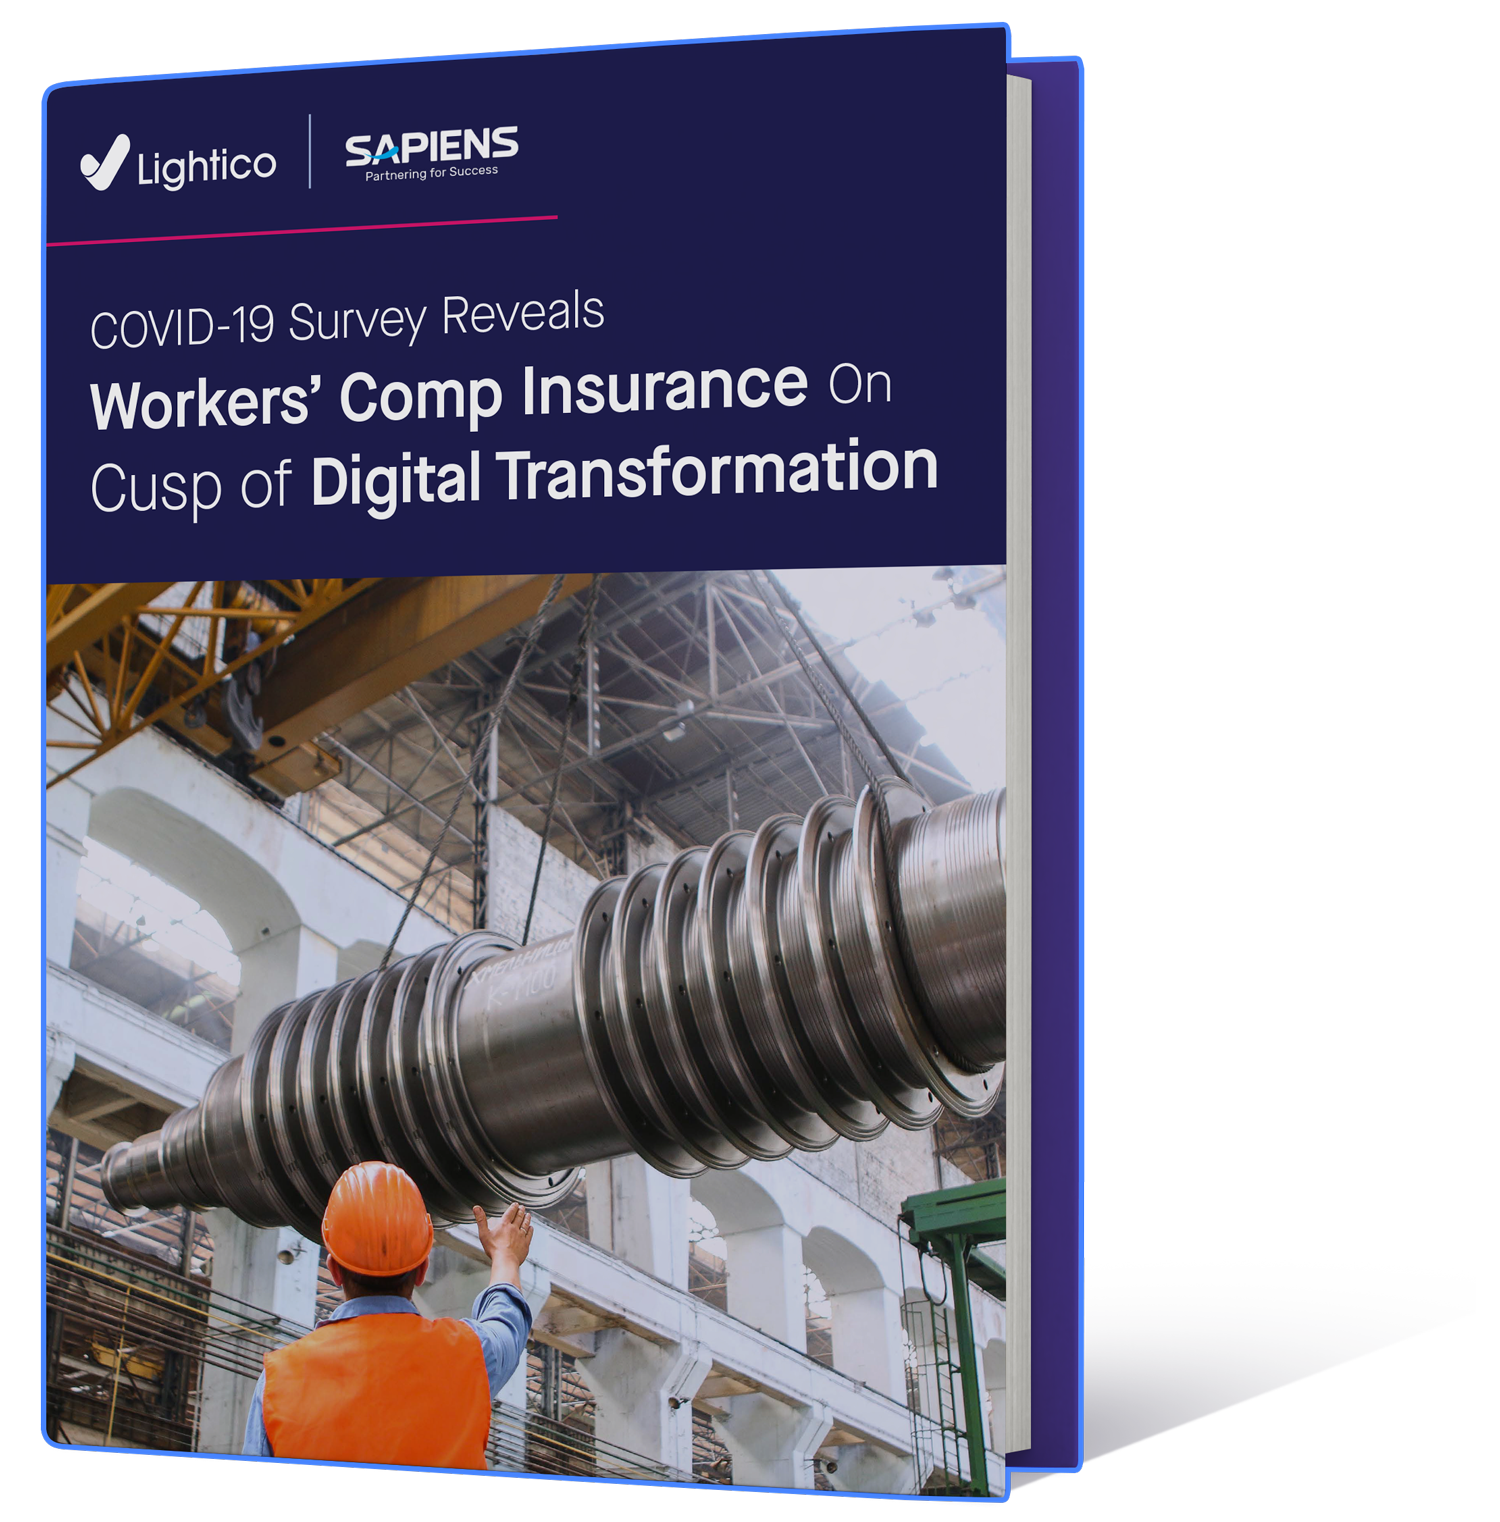 Sapiens-Workers-Comp-Insurance-On-Cusp-Digital-Transformation-eBook-Free-Book-Title-Cover-Mockup (1)